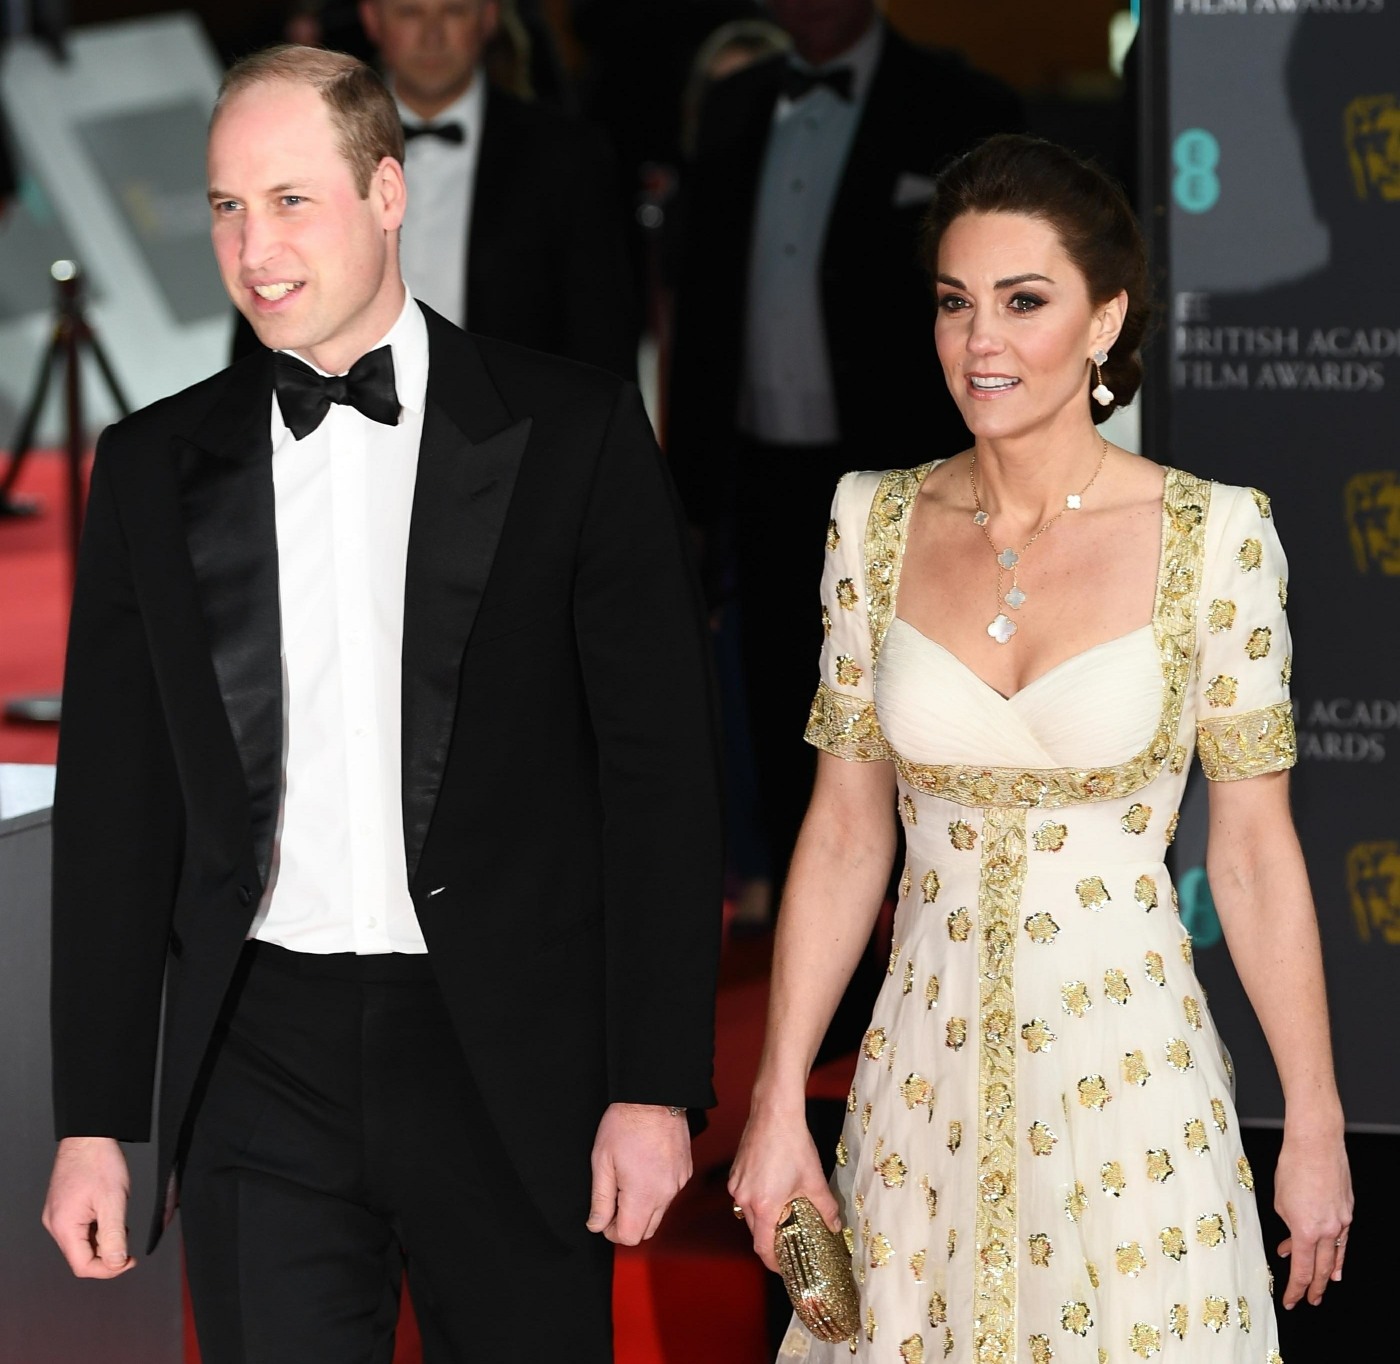 The Duke and Duchess of Cambridge attend the EE British Academy Film Awards 2020 in London